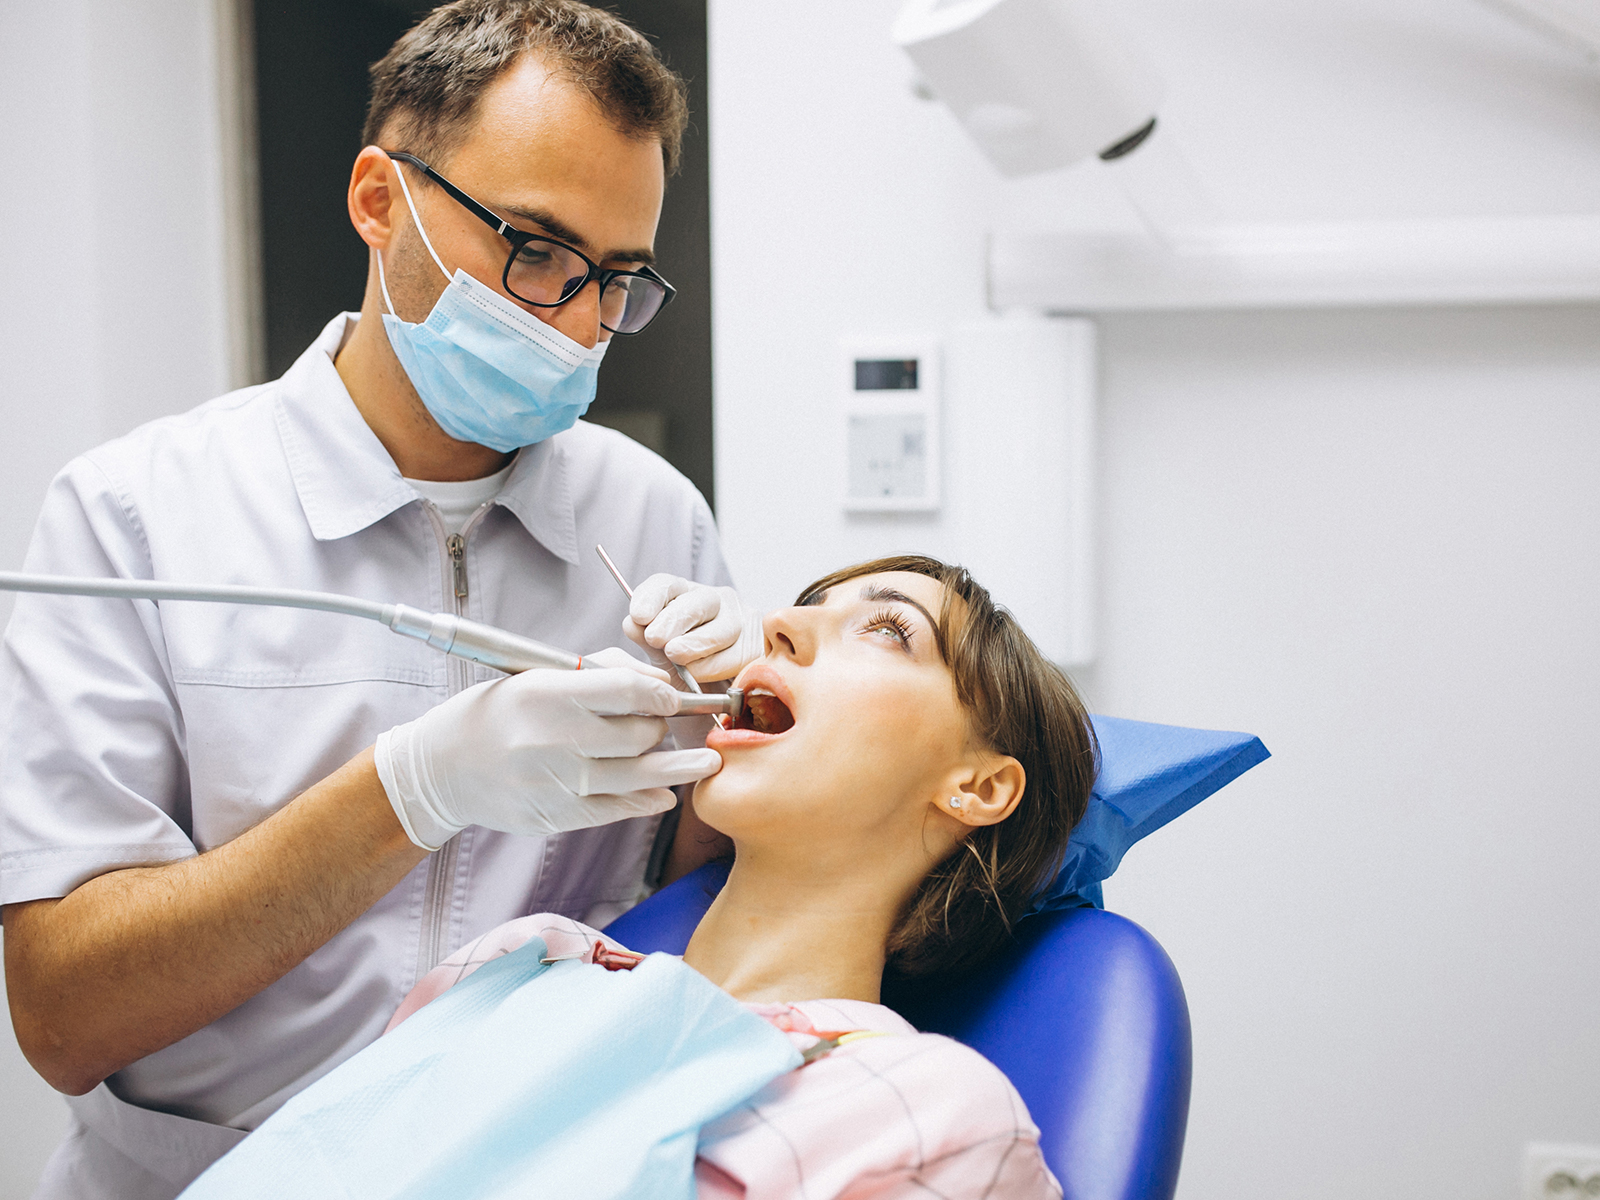 How Important Is A Second Opinion For A Dental Diagnosis?